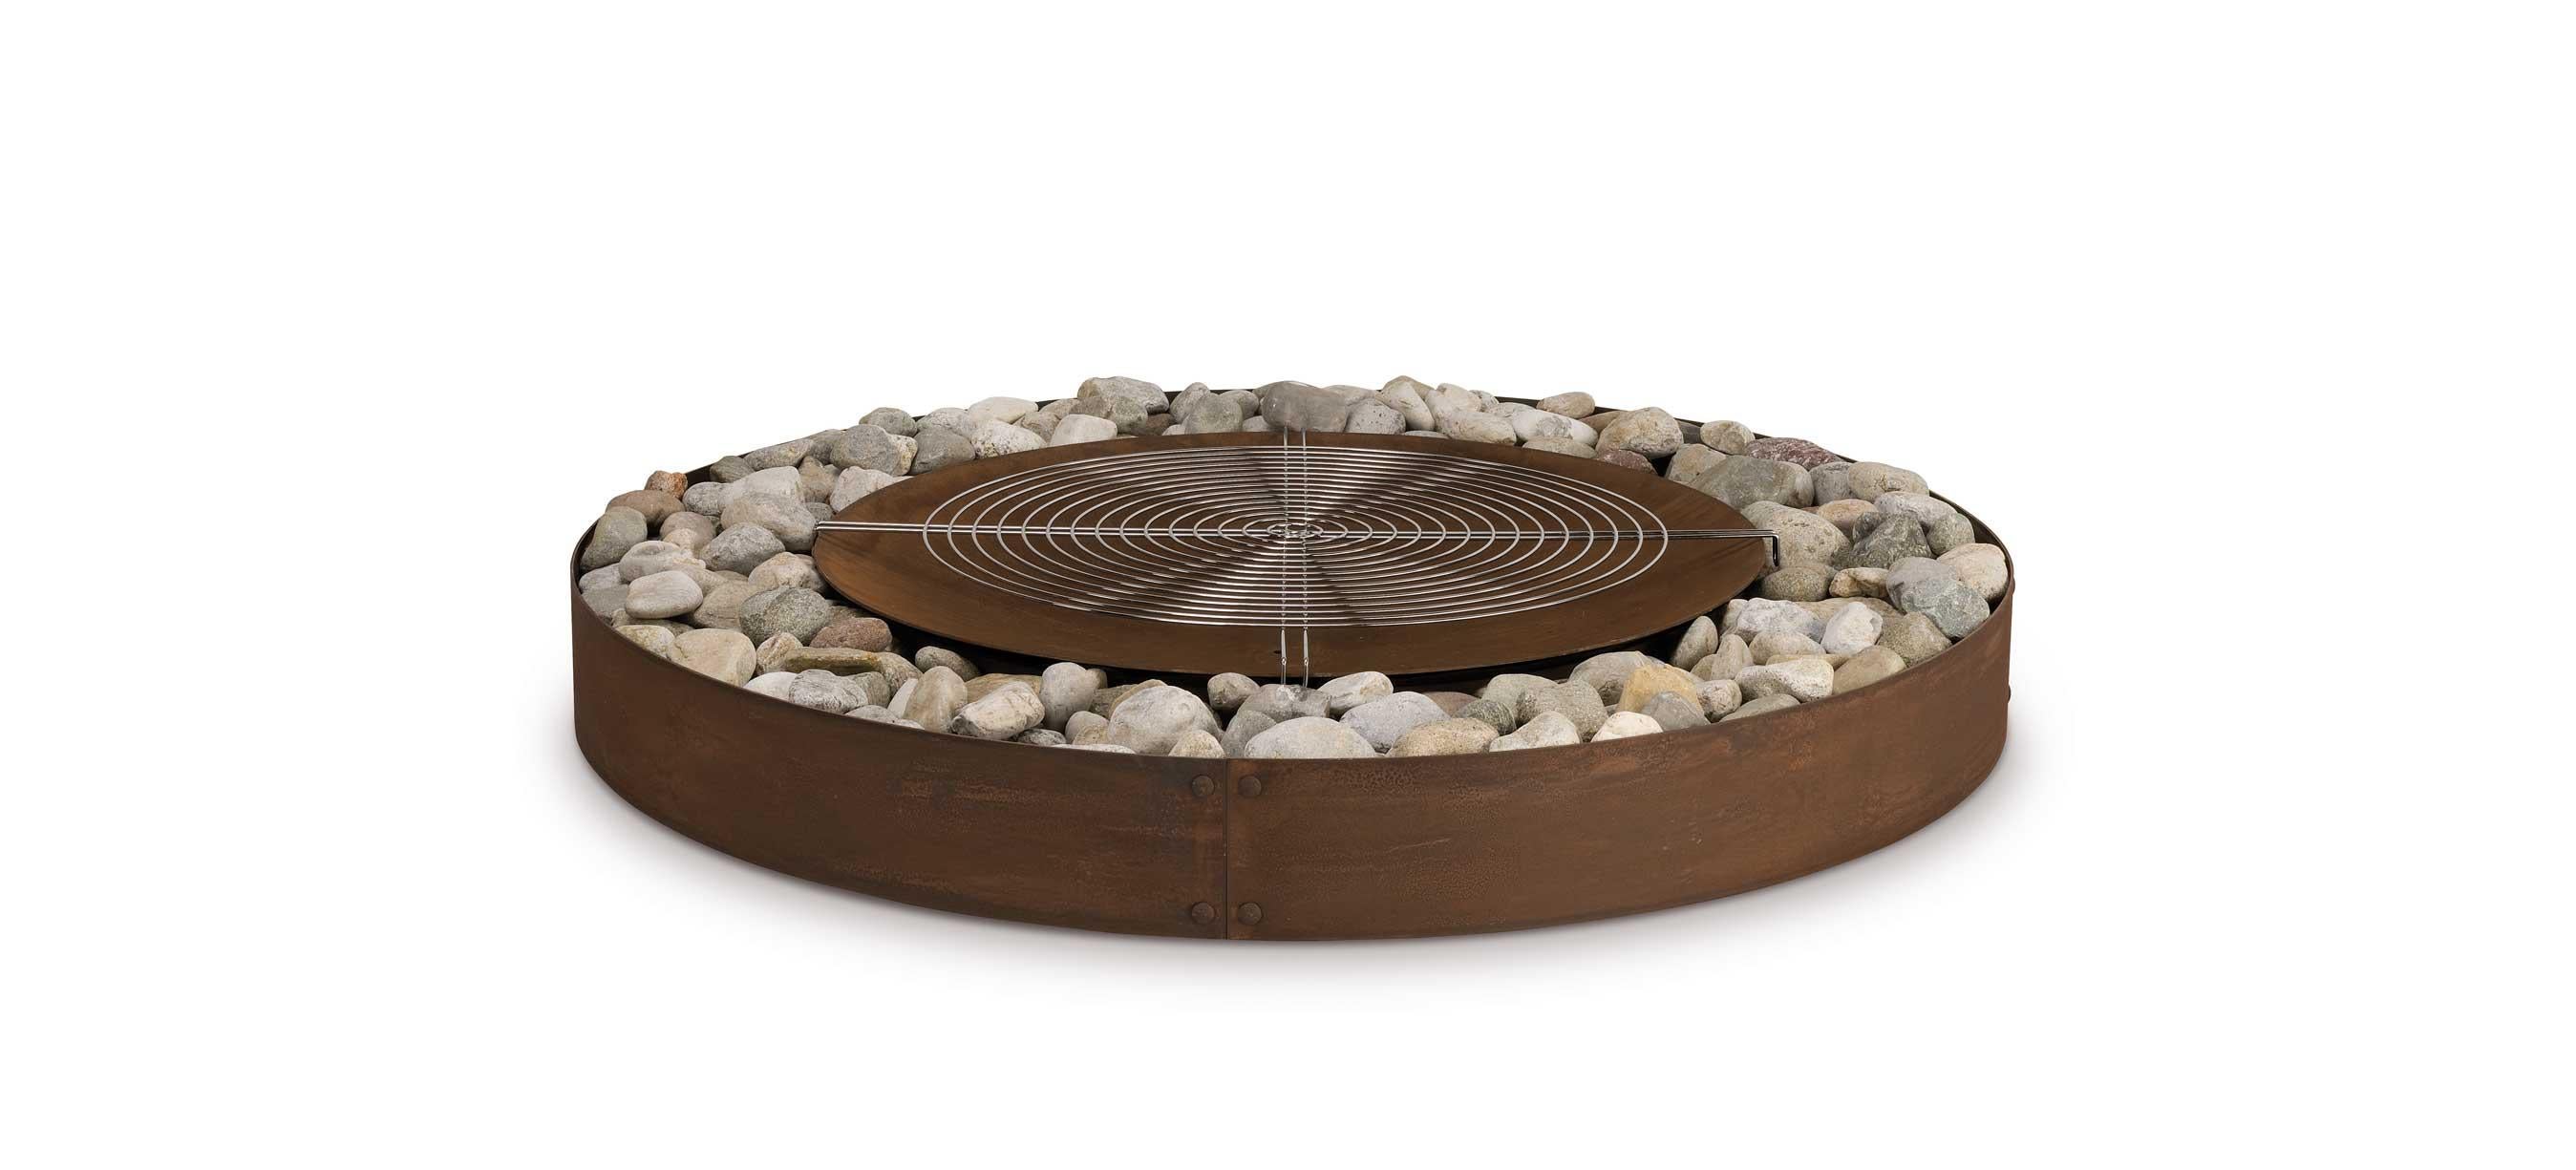 Zen fire pit by AK47 Design.

Steel fire pit Ø1800 mm.
Zen is a wood-burning outdoor fire pit with a round steel crown and built-in brazier. Stone, gravel, volcanic stones and sand are just some of the natural elements that may be used to